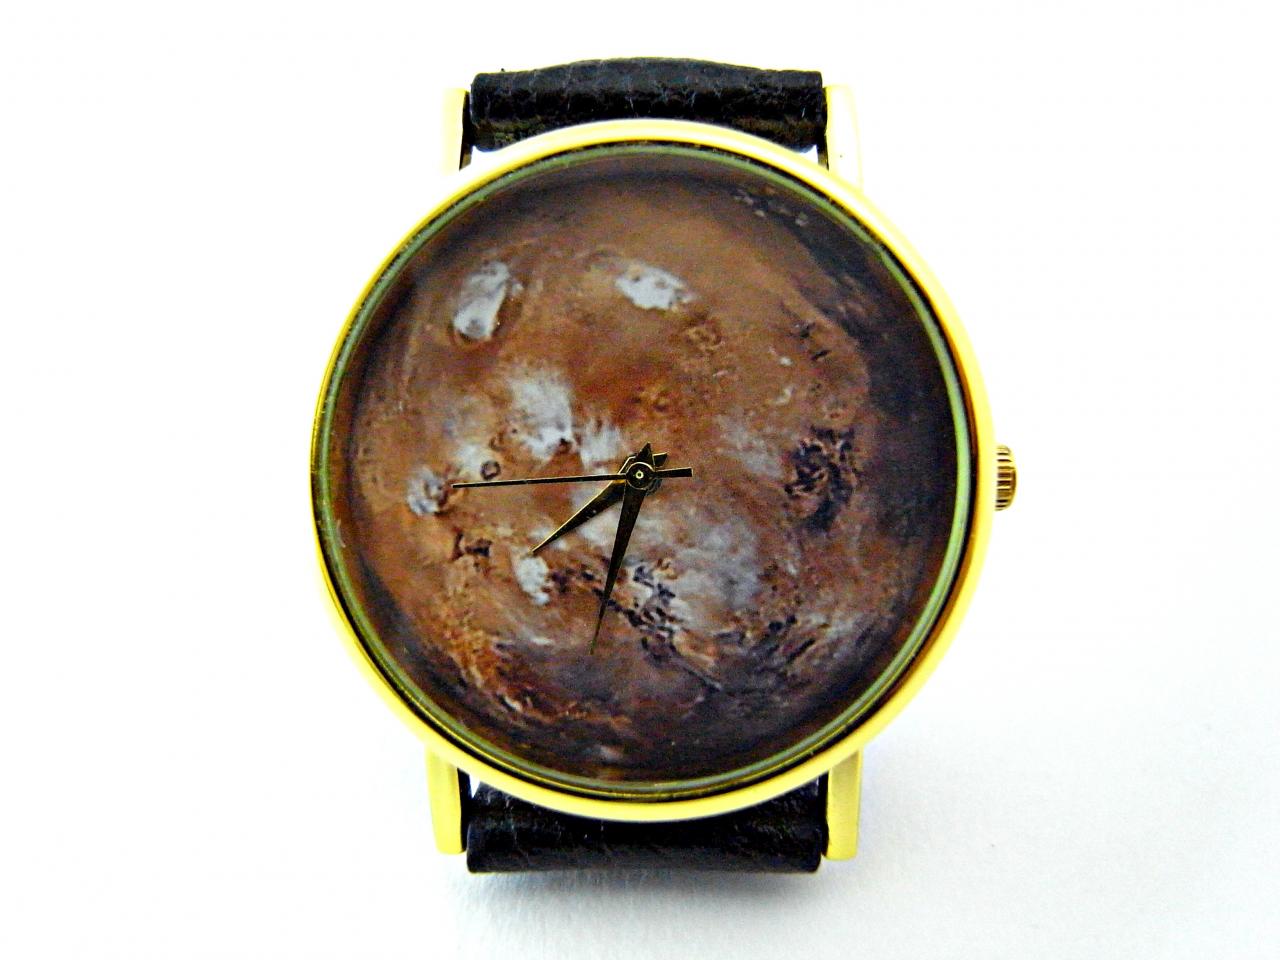 Mars Leather Wrist Watches, Woman Man Lady Unisex Watch, Genuine Leather Handmade Unique Watch #14